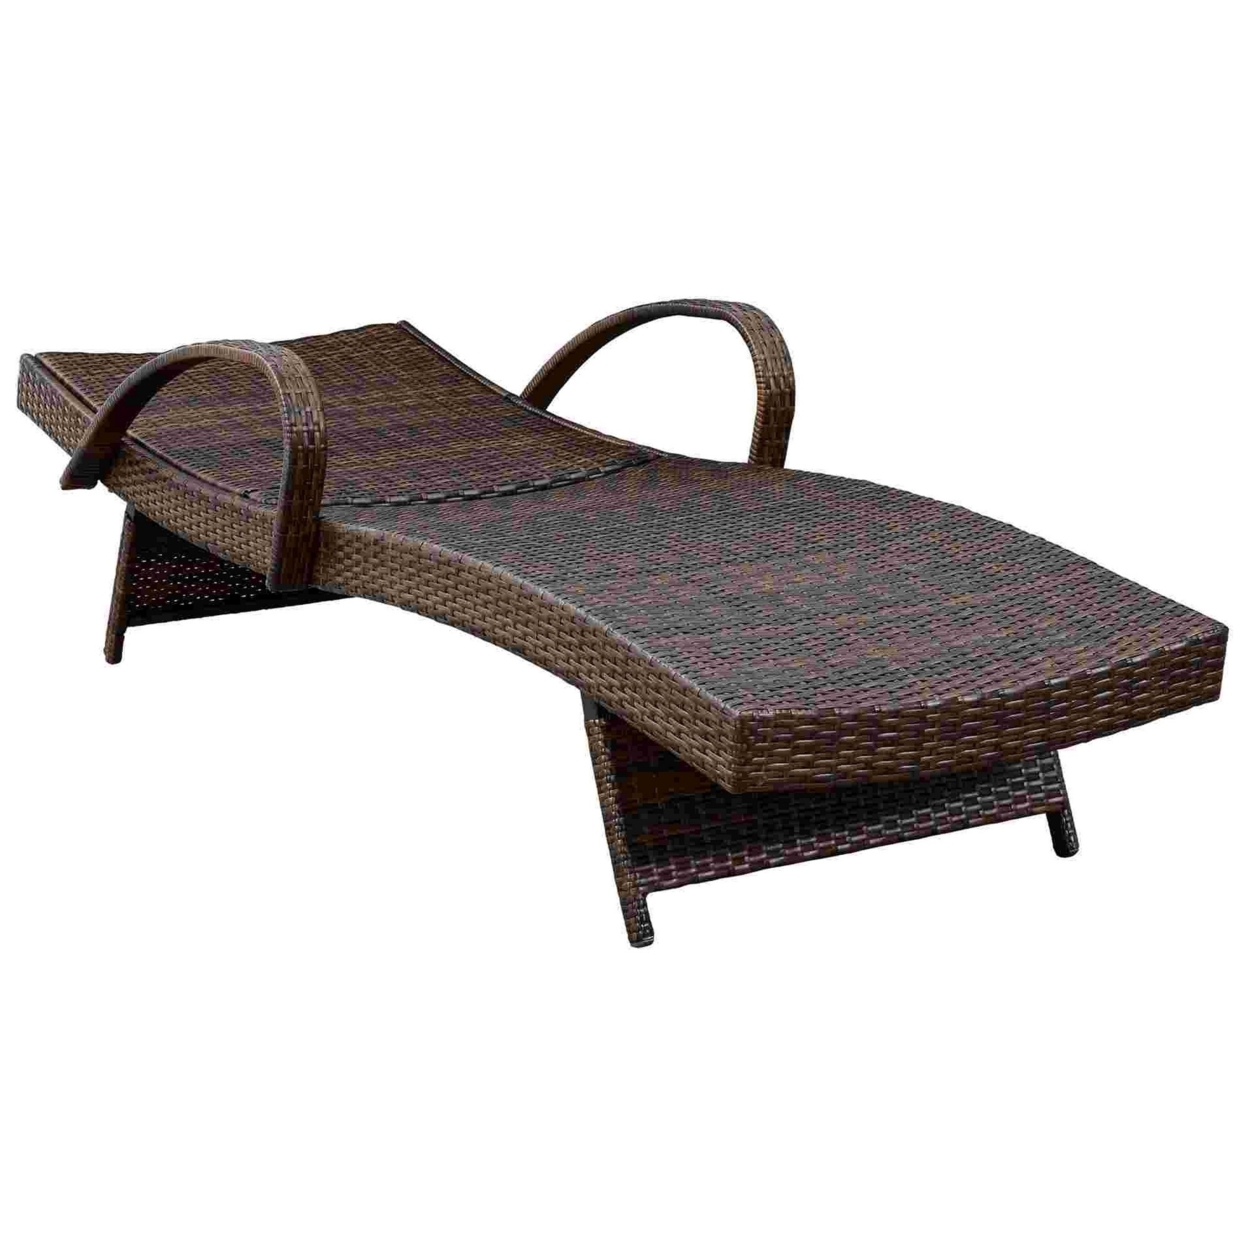 Reclining Chaise Lounge With Wicker Frame, Set Of 2, Brown- Saltoro Sherpi